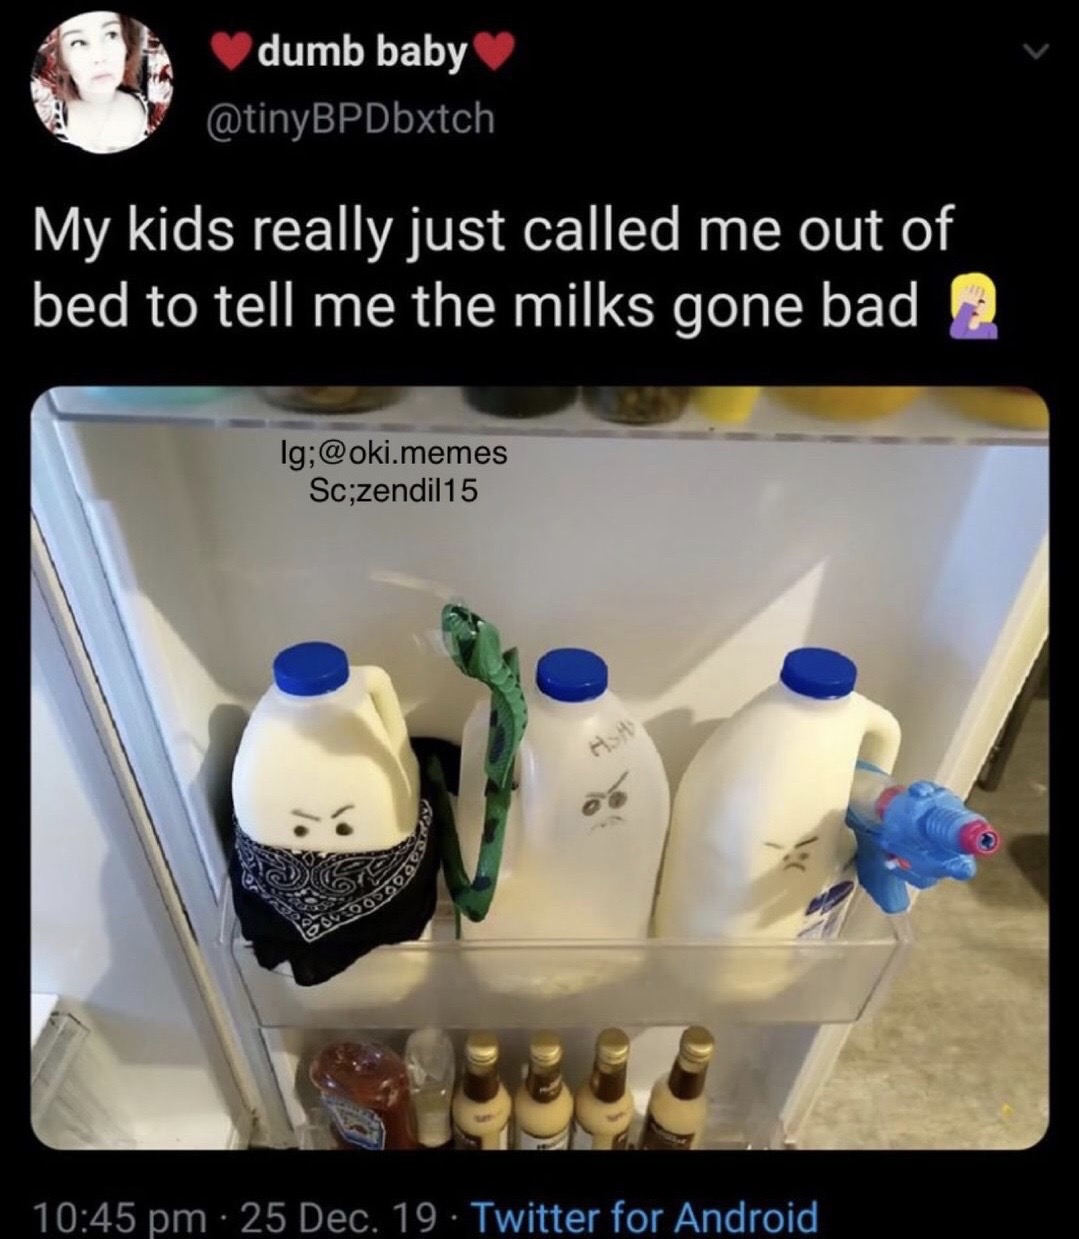 plastic - dumb baby My kids really just called me out of bed to tell me the milks gone bad 2 Ig;.memes Sc;zendil 15 Ish 25 Dec. 19. Twitter for Android,